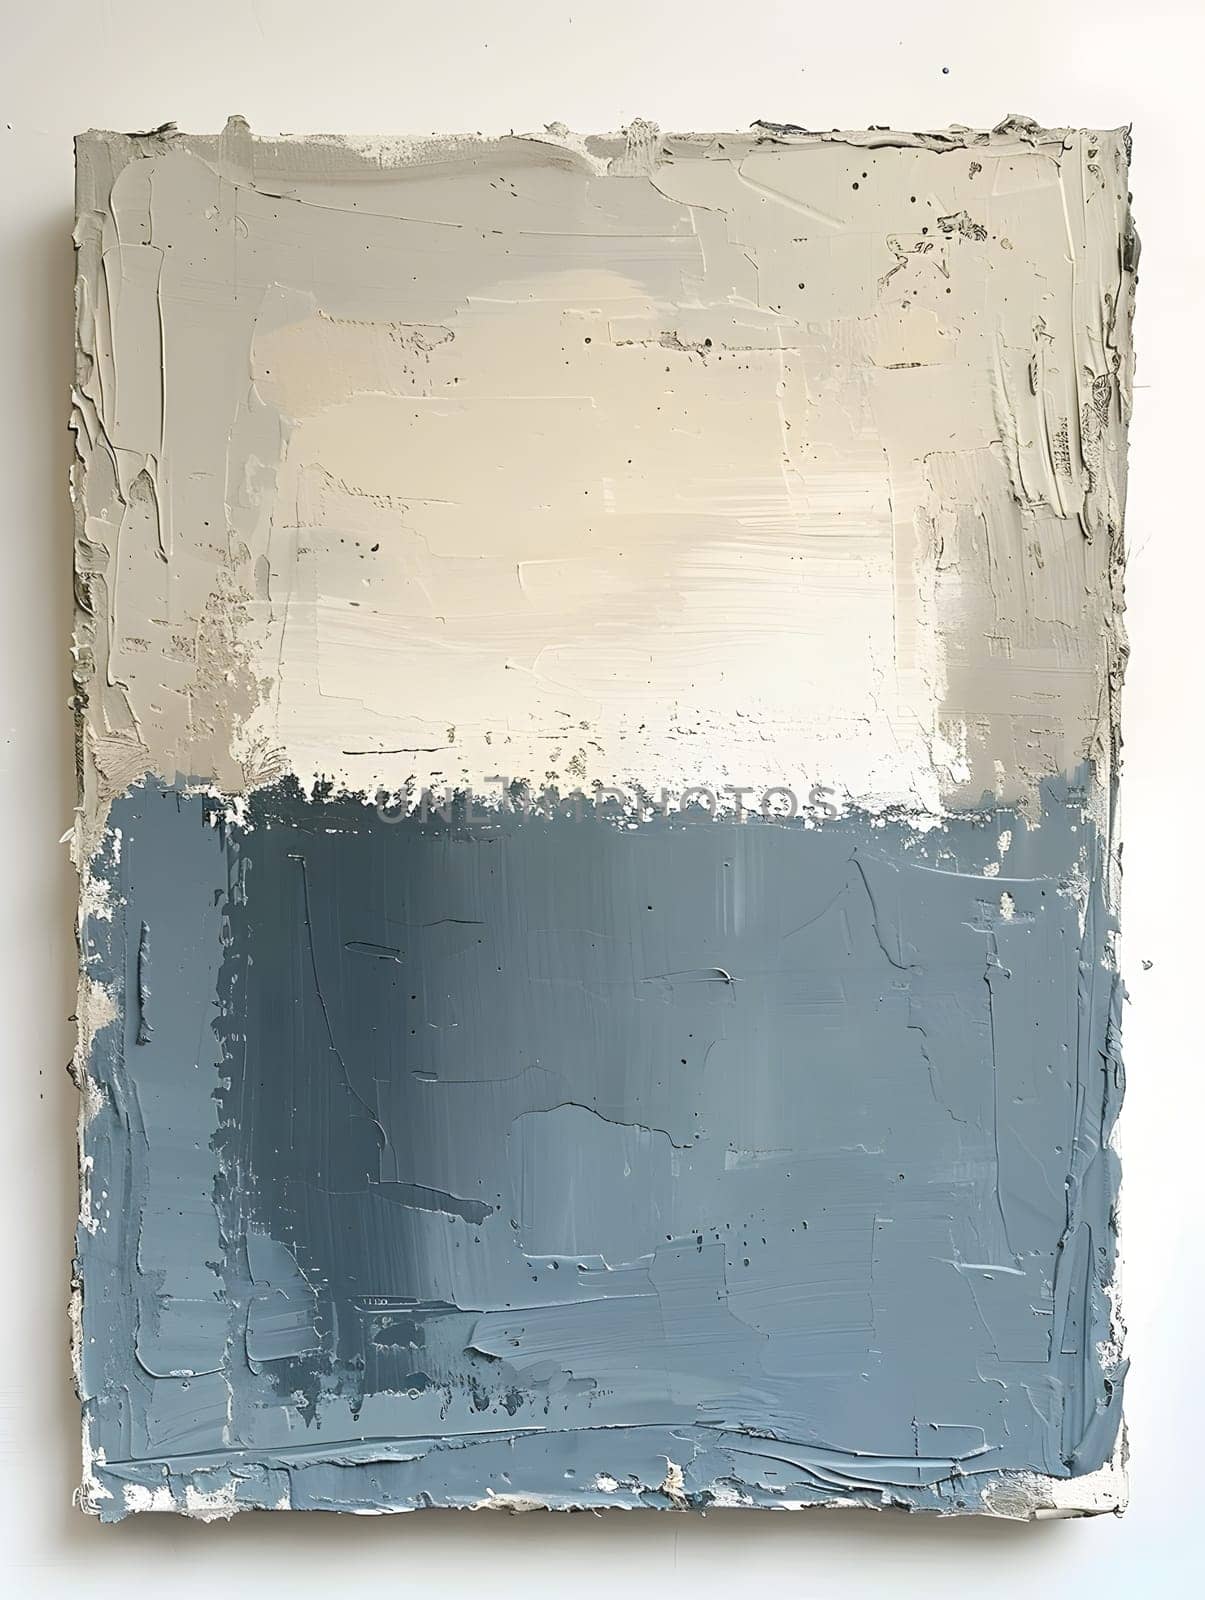 A rectangular blue and white painting hangs on a white wall, adding a pop of color to the room. The fluid strokes of paint create a calming effect